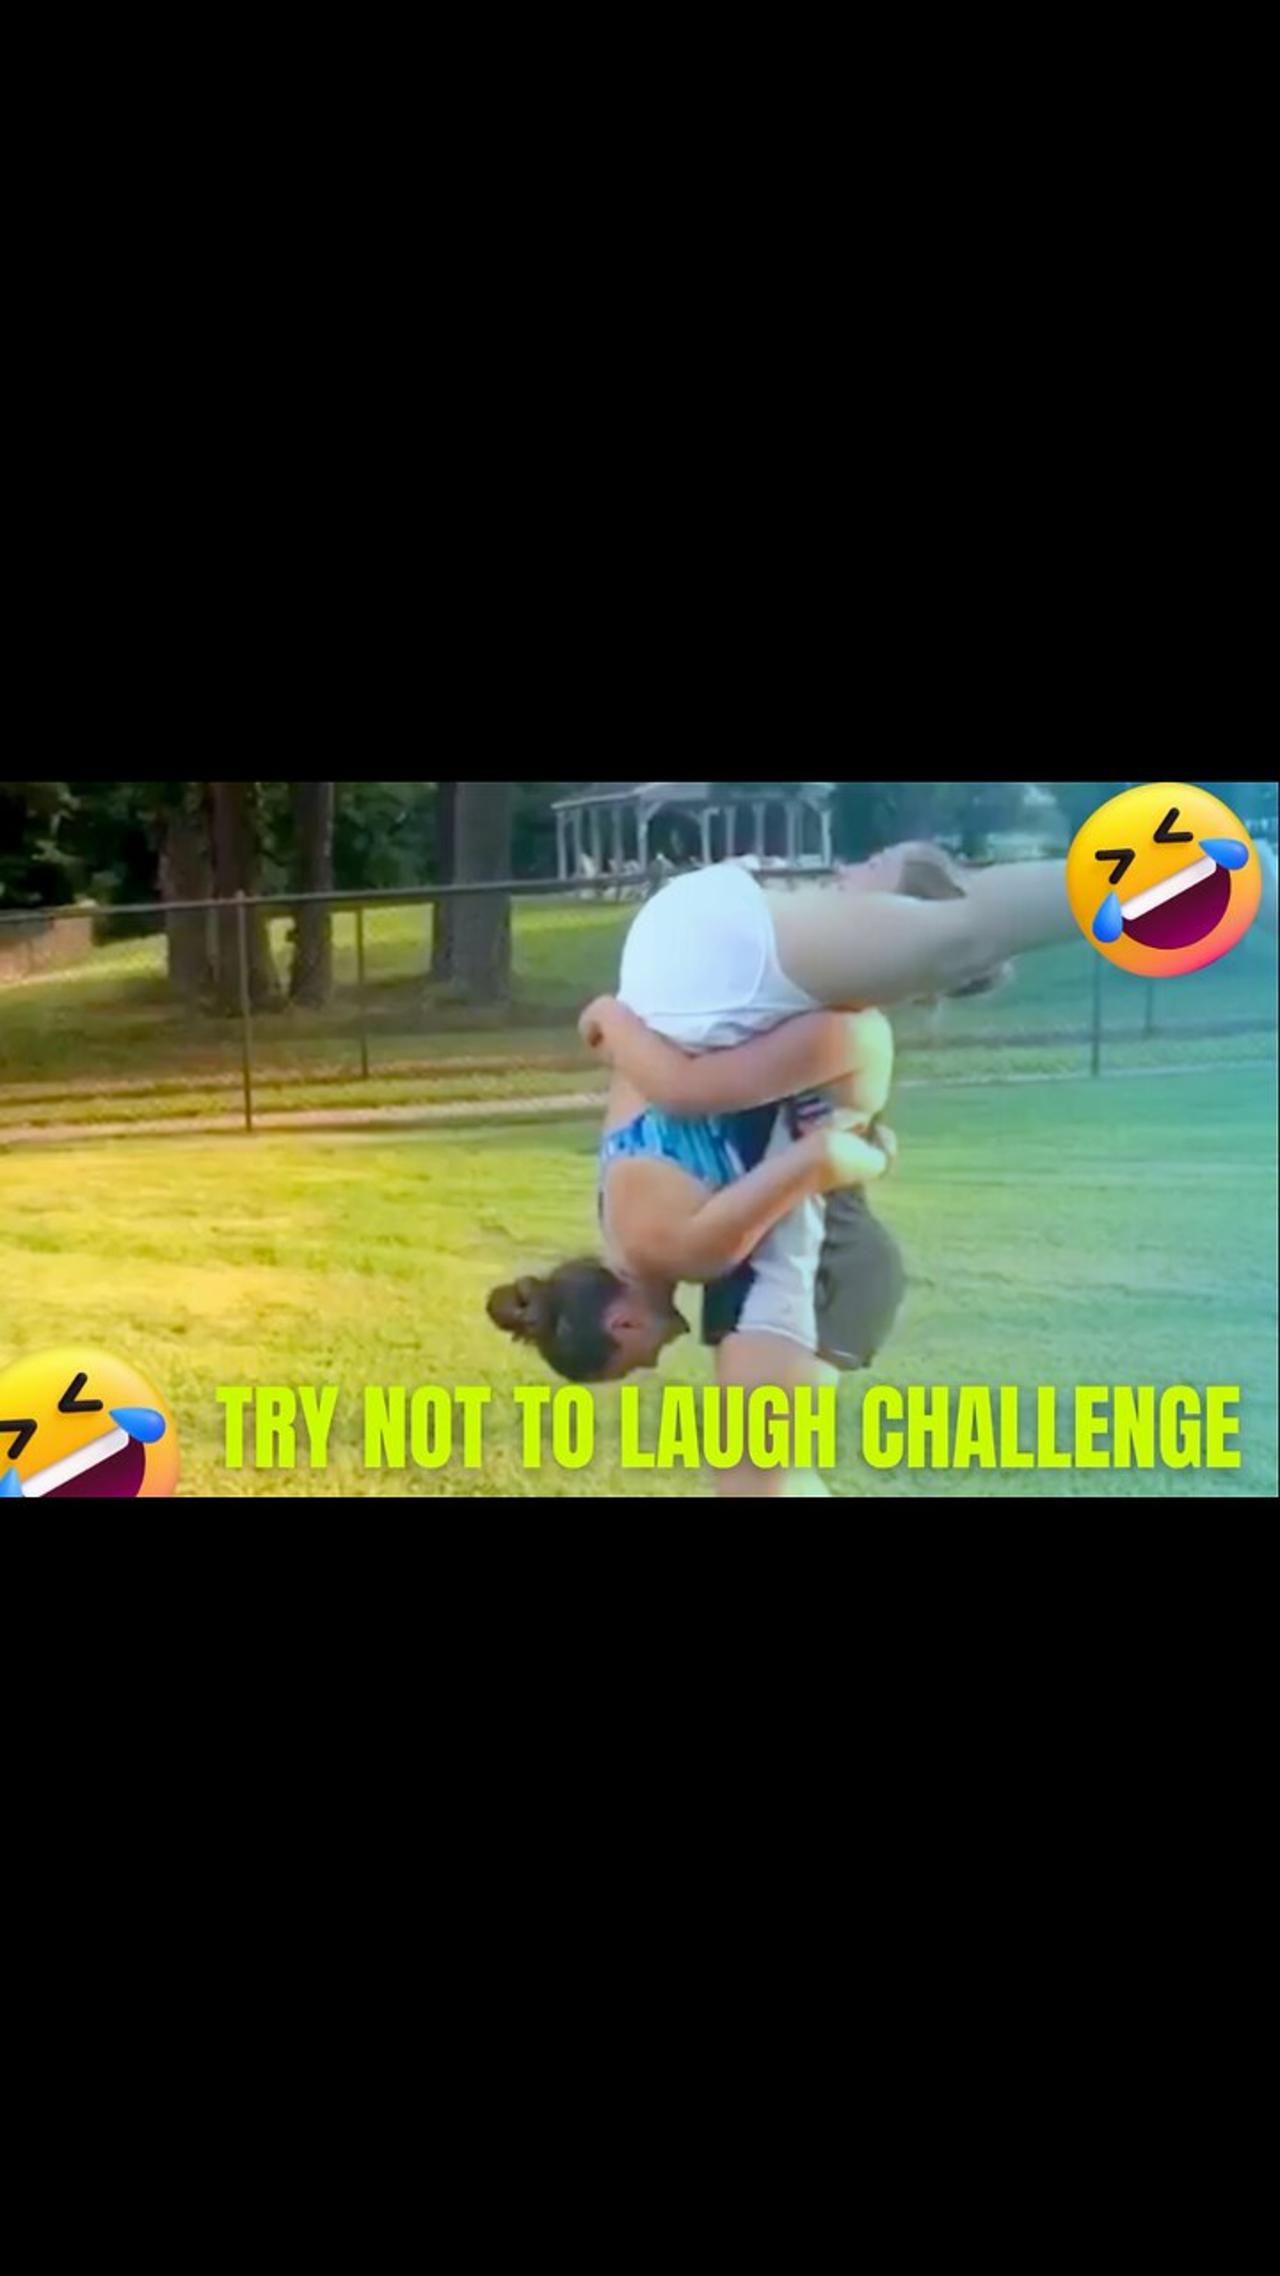 TRY NOT TO LAUGH CHALLENGE, part 10 of the 2019 Funny Video Collection